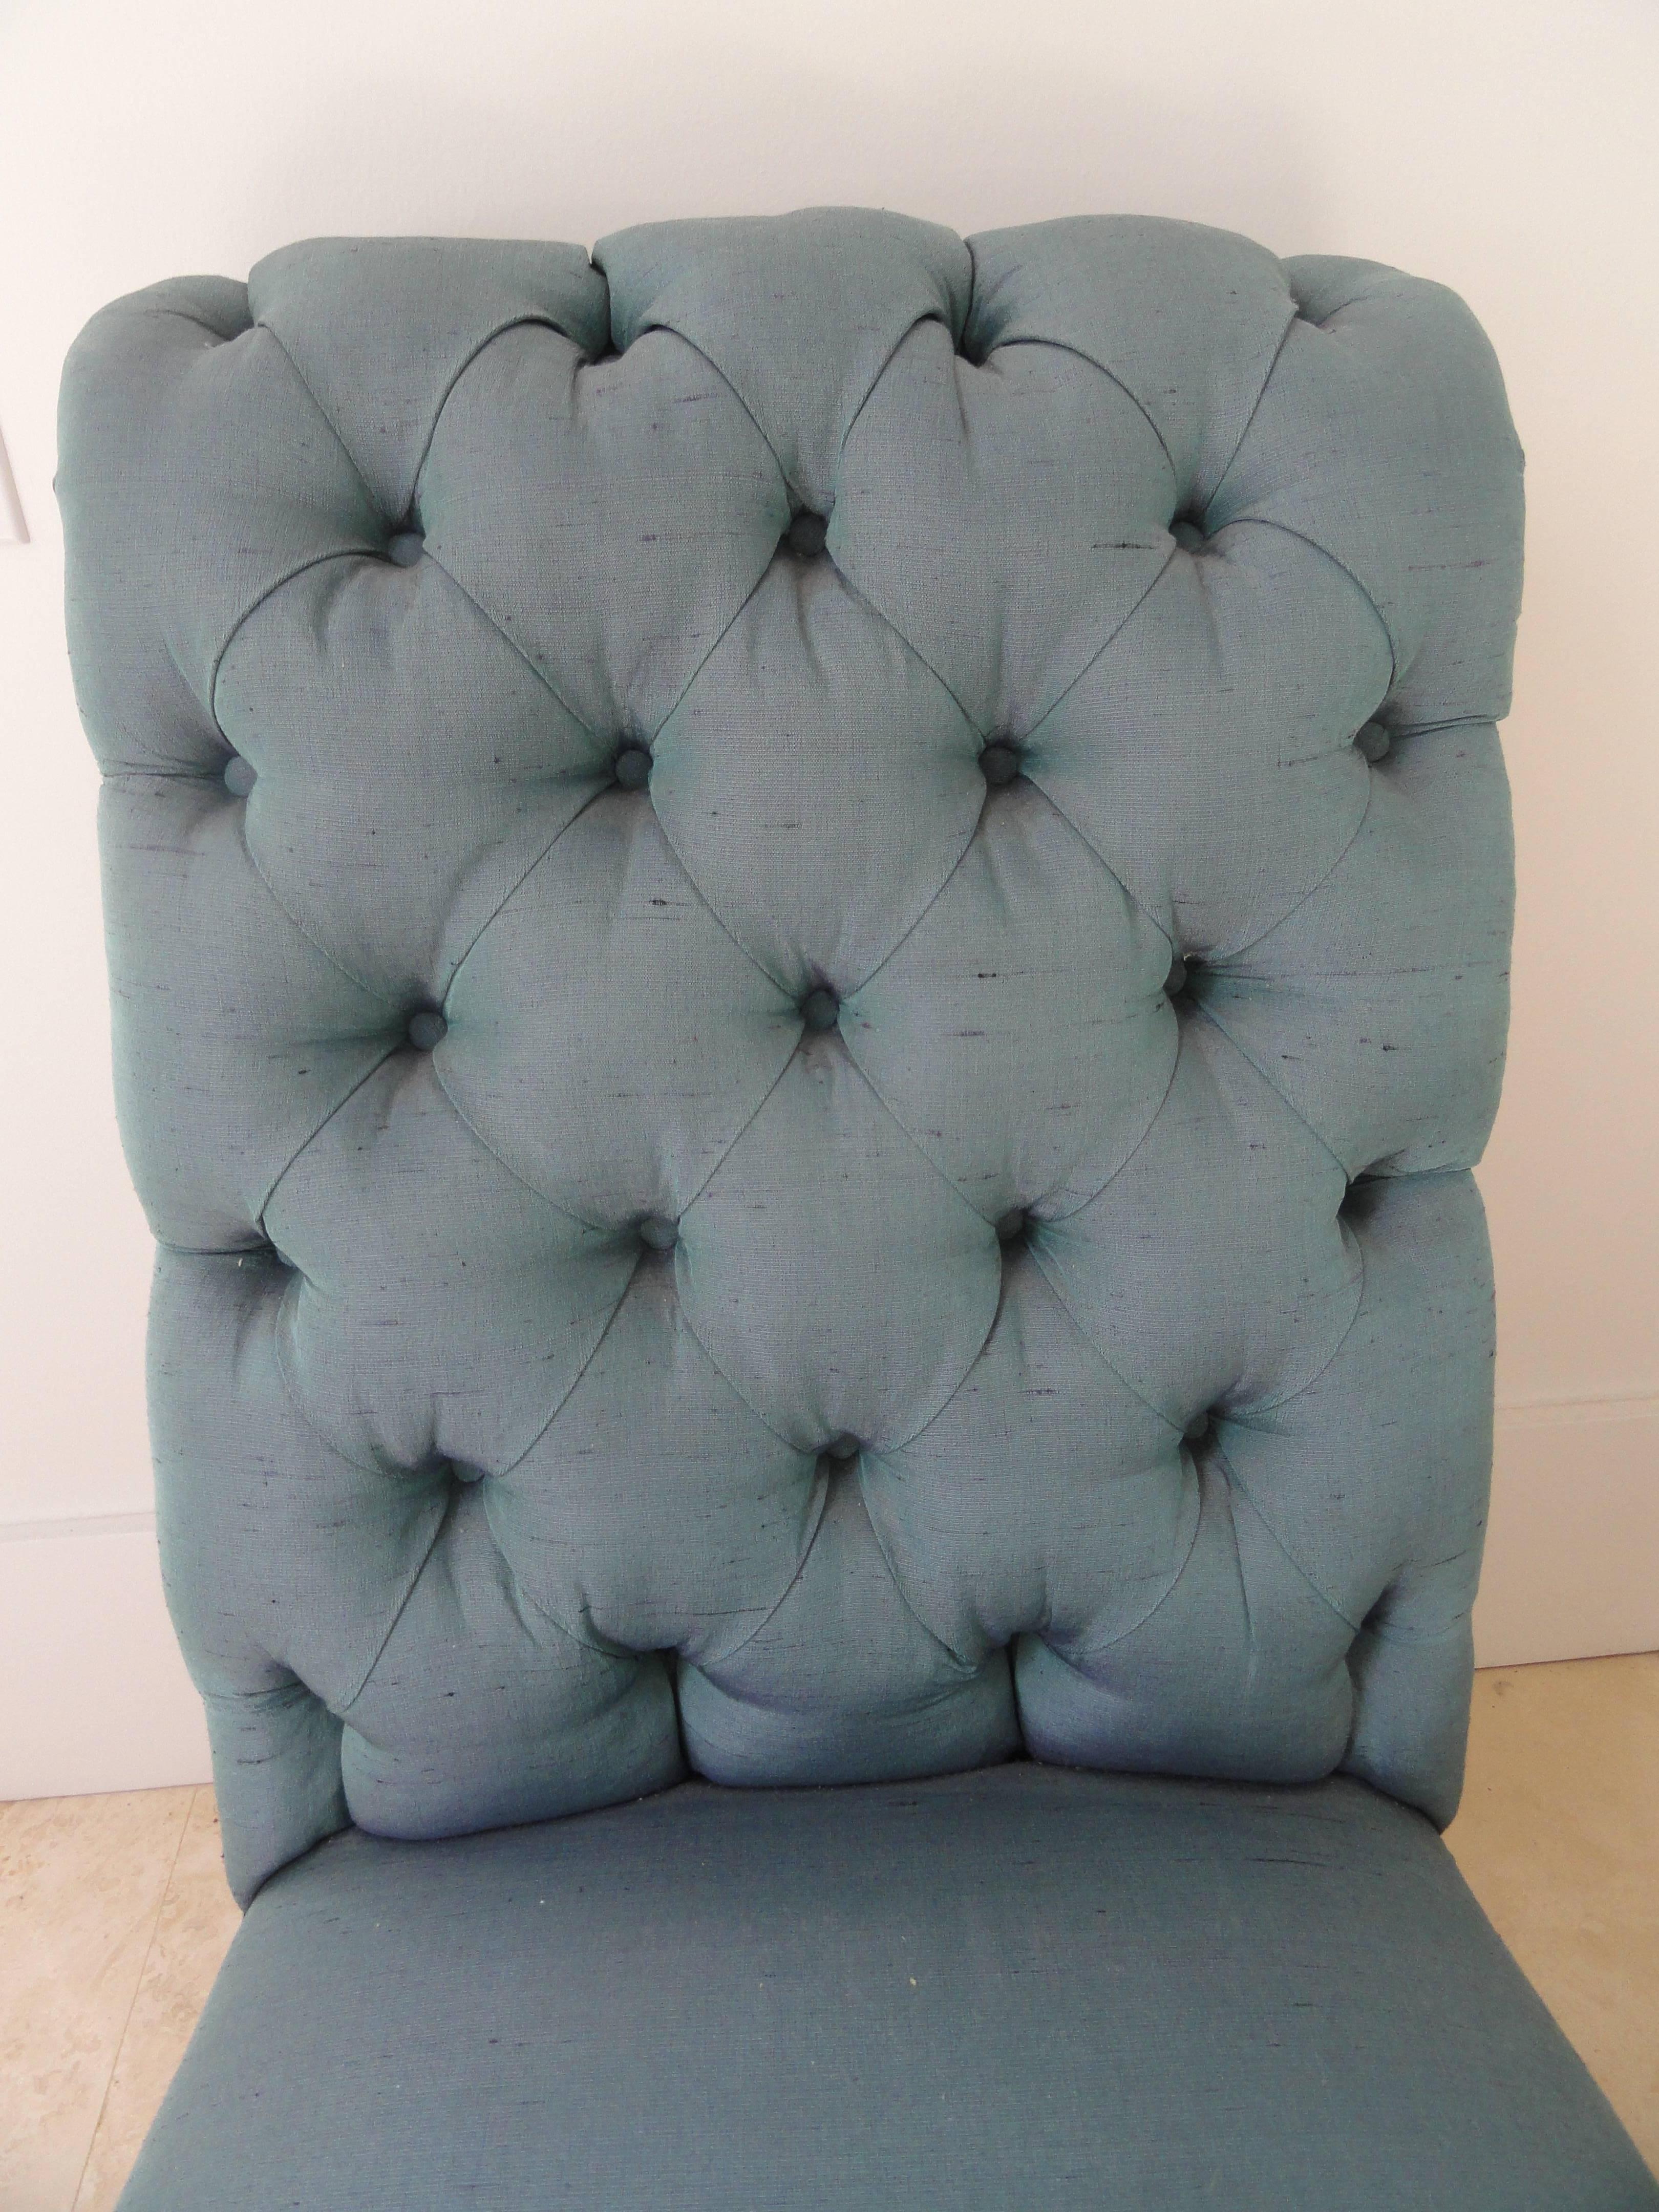 19th Century Napoleon III Tufted Back Chair In Good Condition For Sale In West Palm Beach, FL